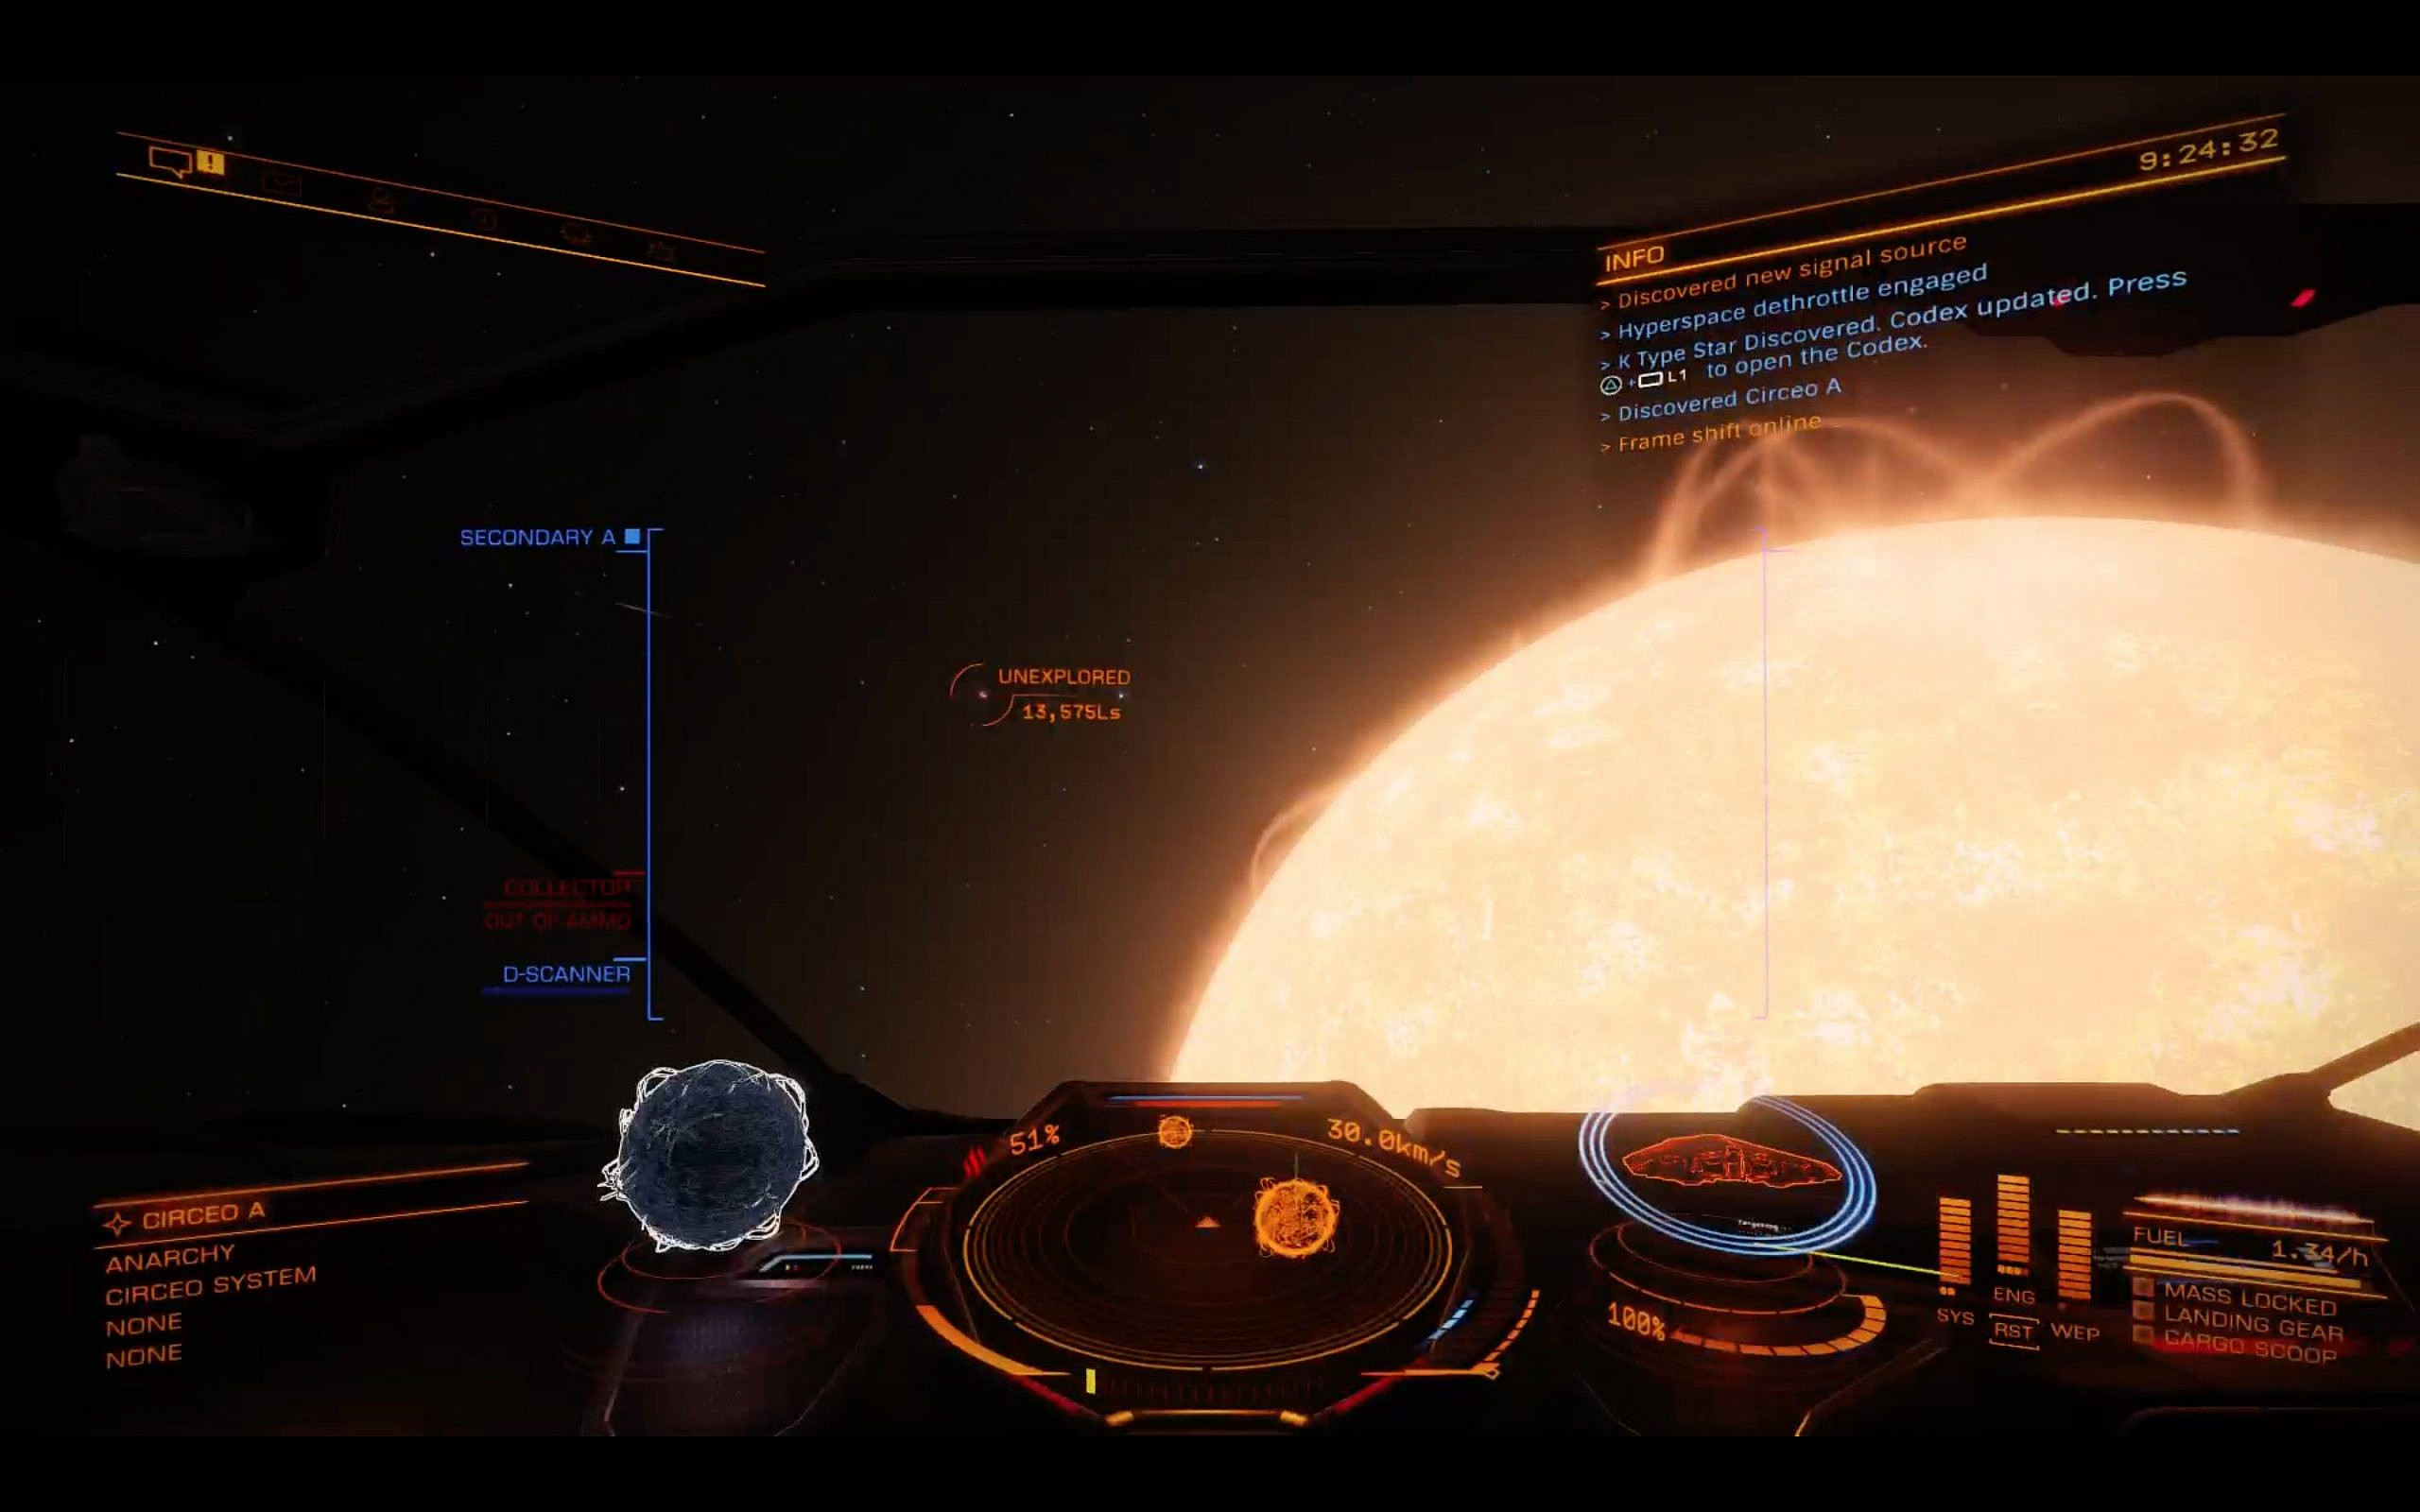 Elite: Dangerous review - in space, no-one can hear you yawn